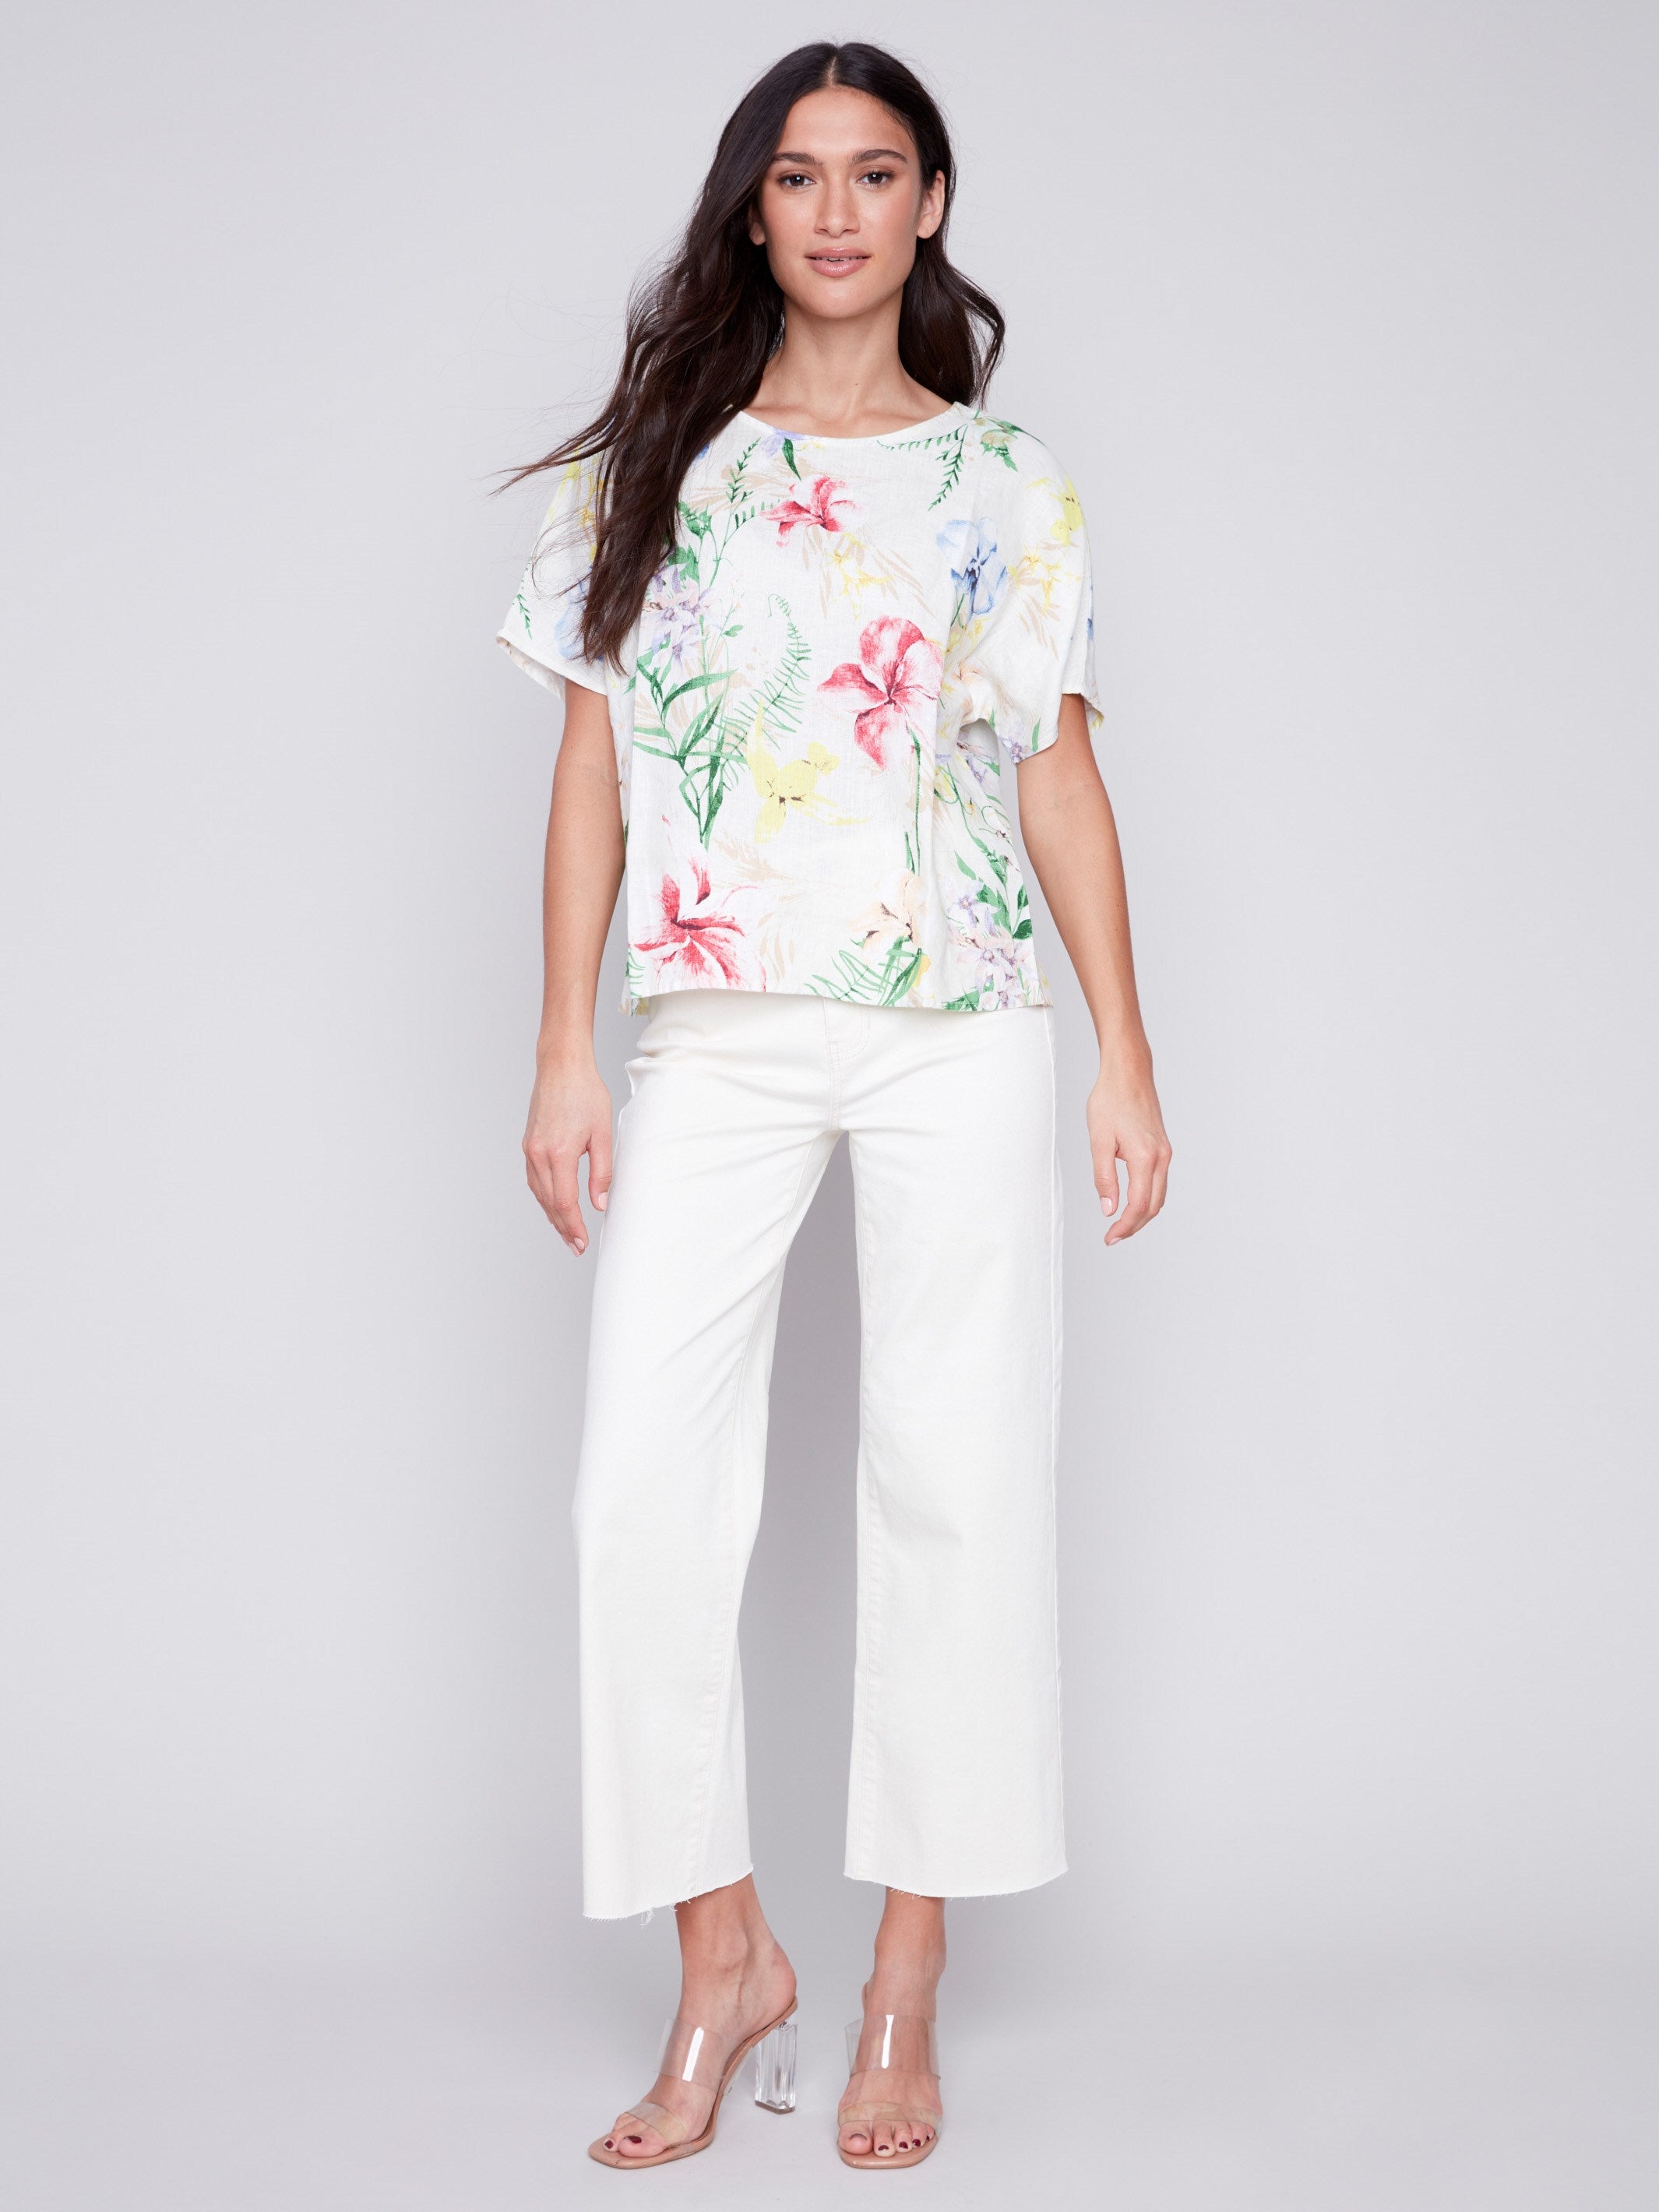 Printed Linen Dolman Top - Wildflower - Charlie B Collection Canada - Image 3